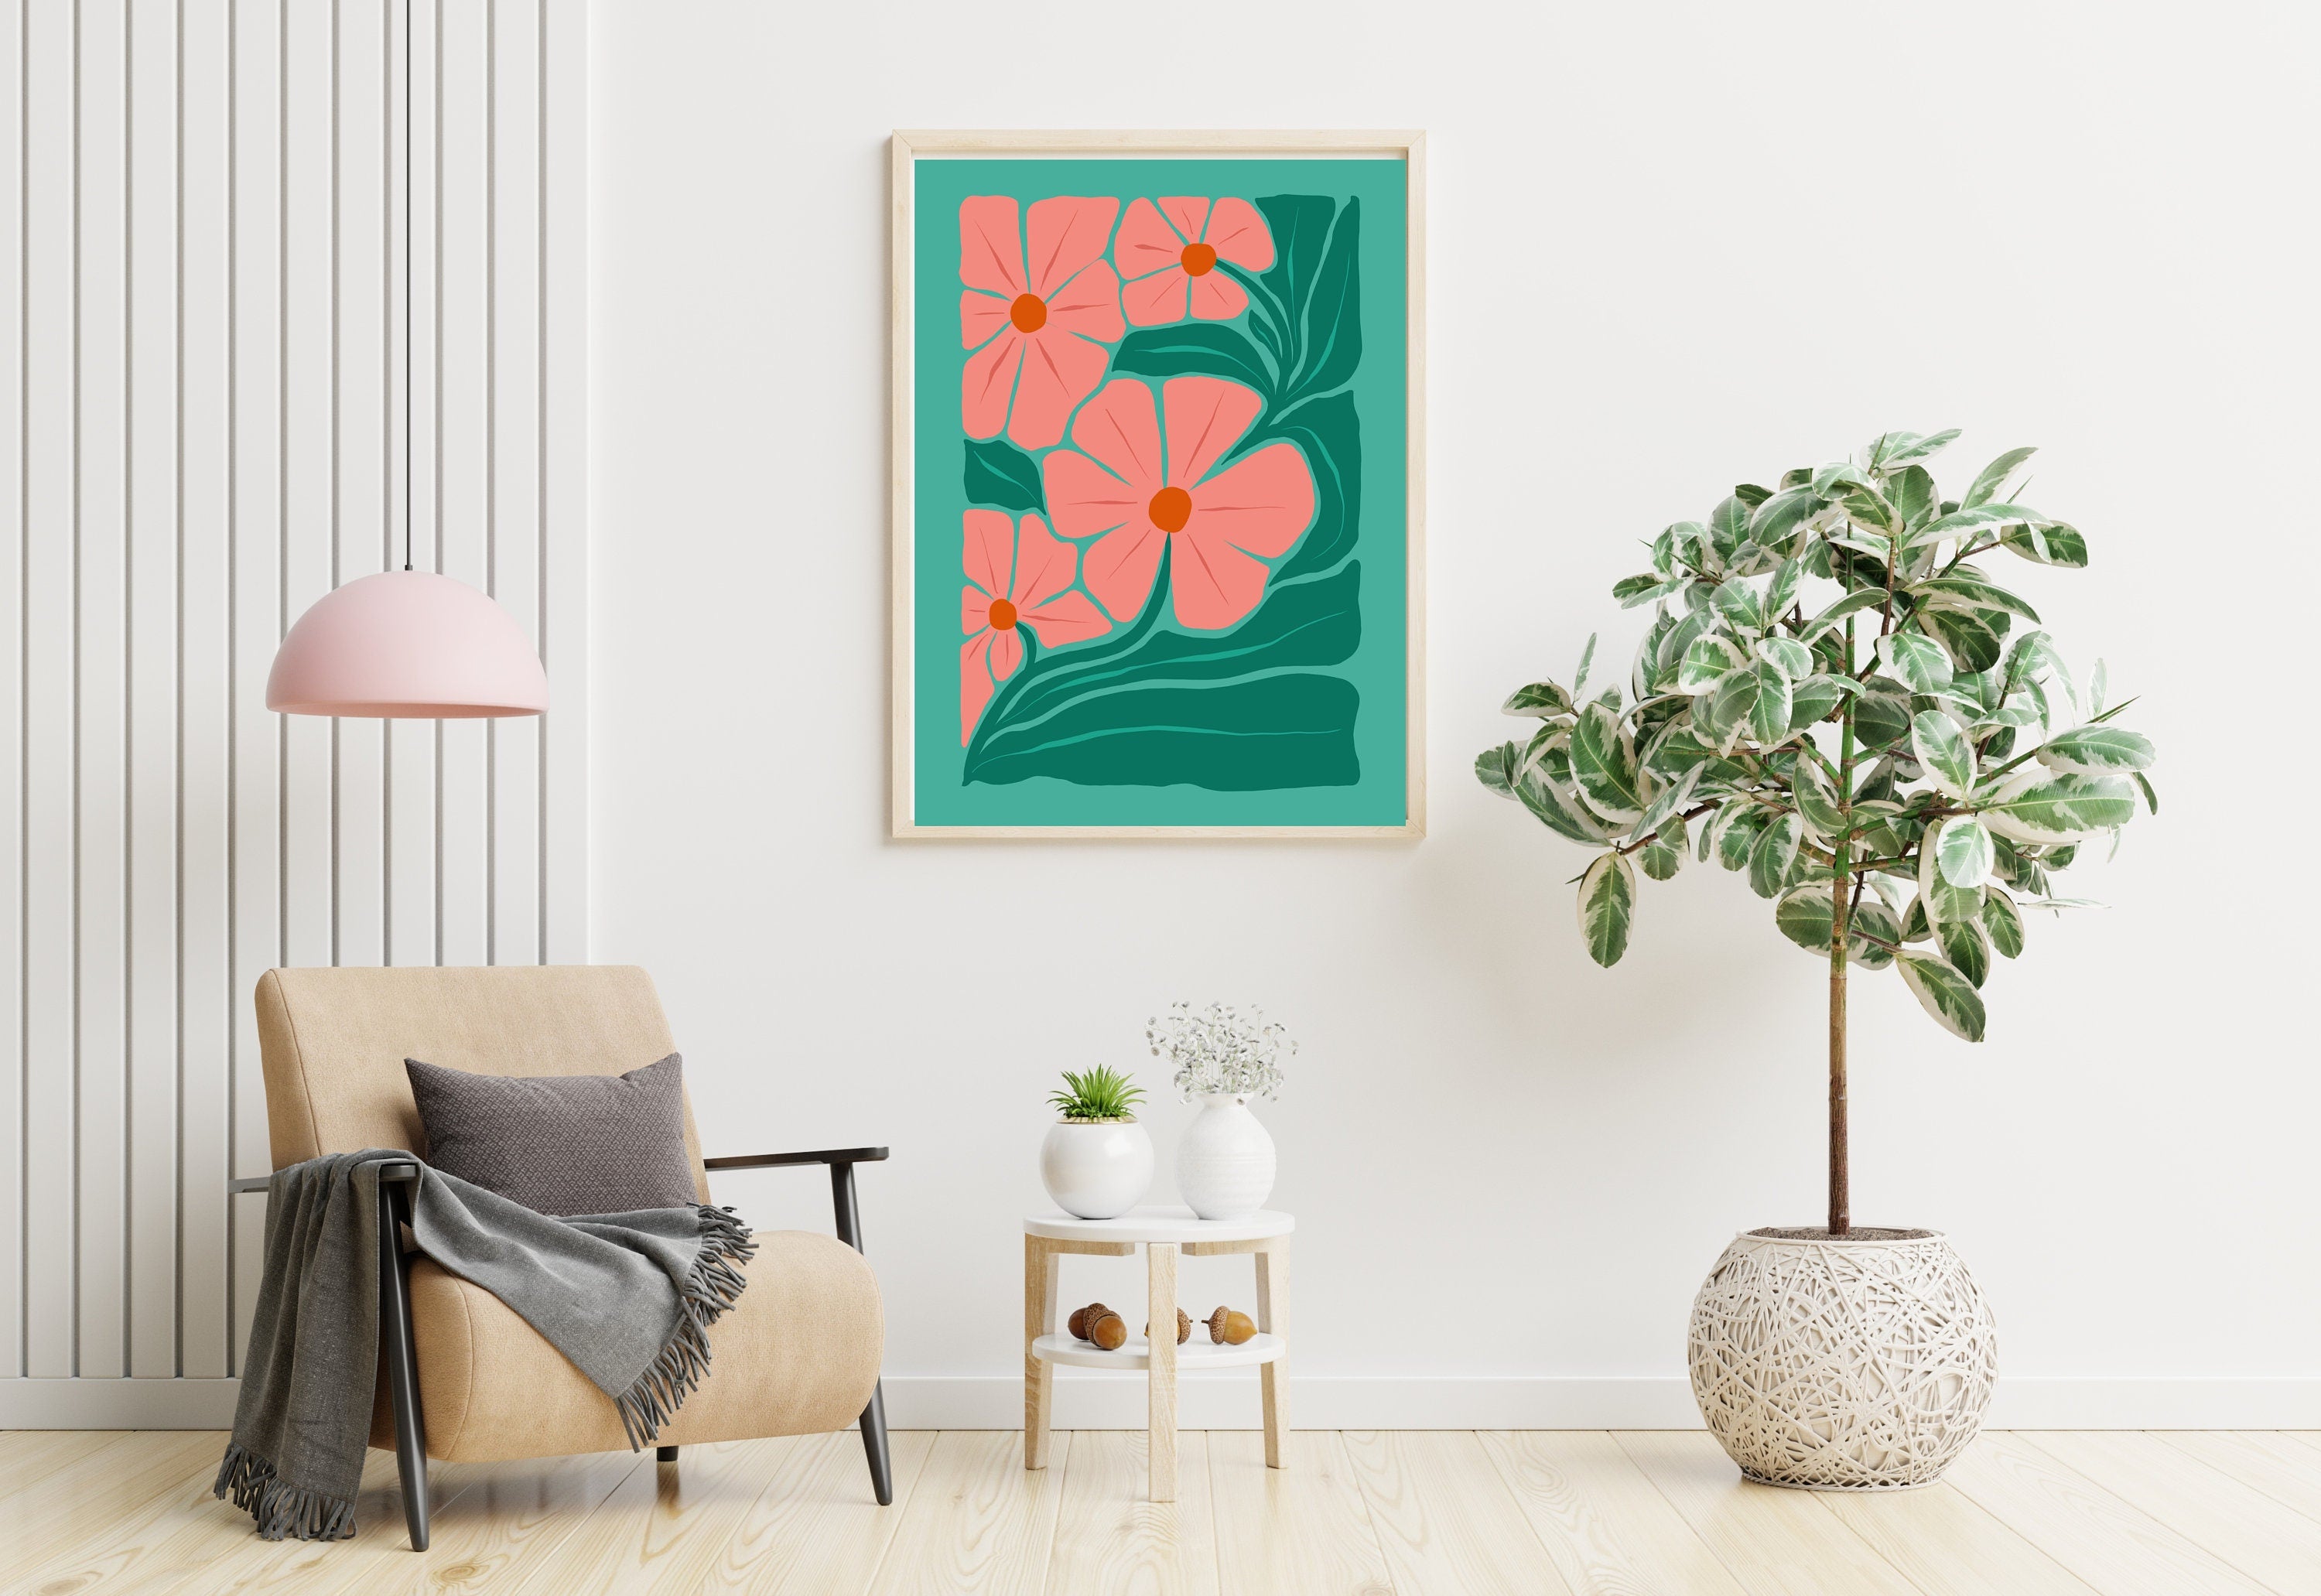 A modern take on nature with abstract floral designs blending seamlessly on a digital canvas.